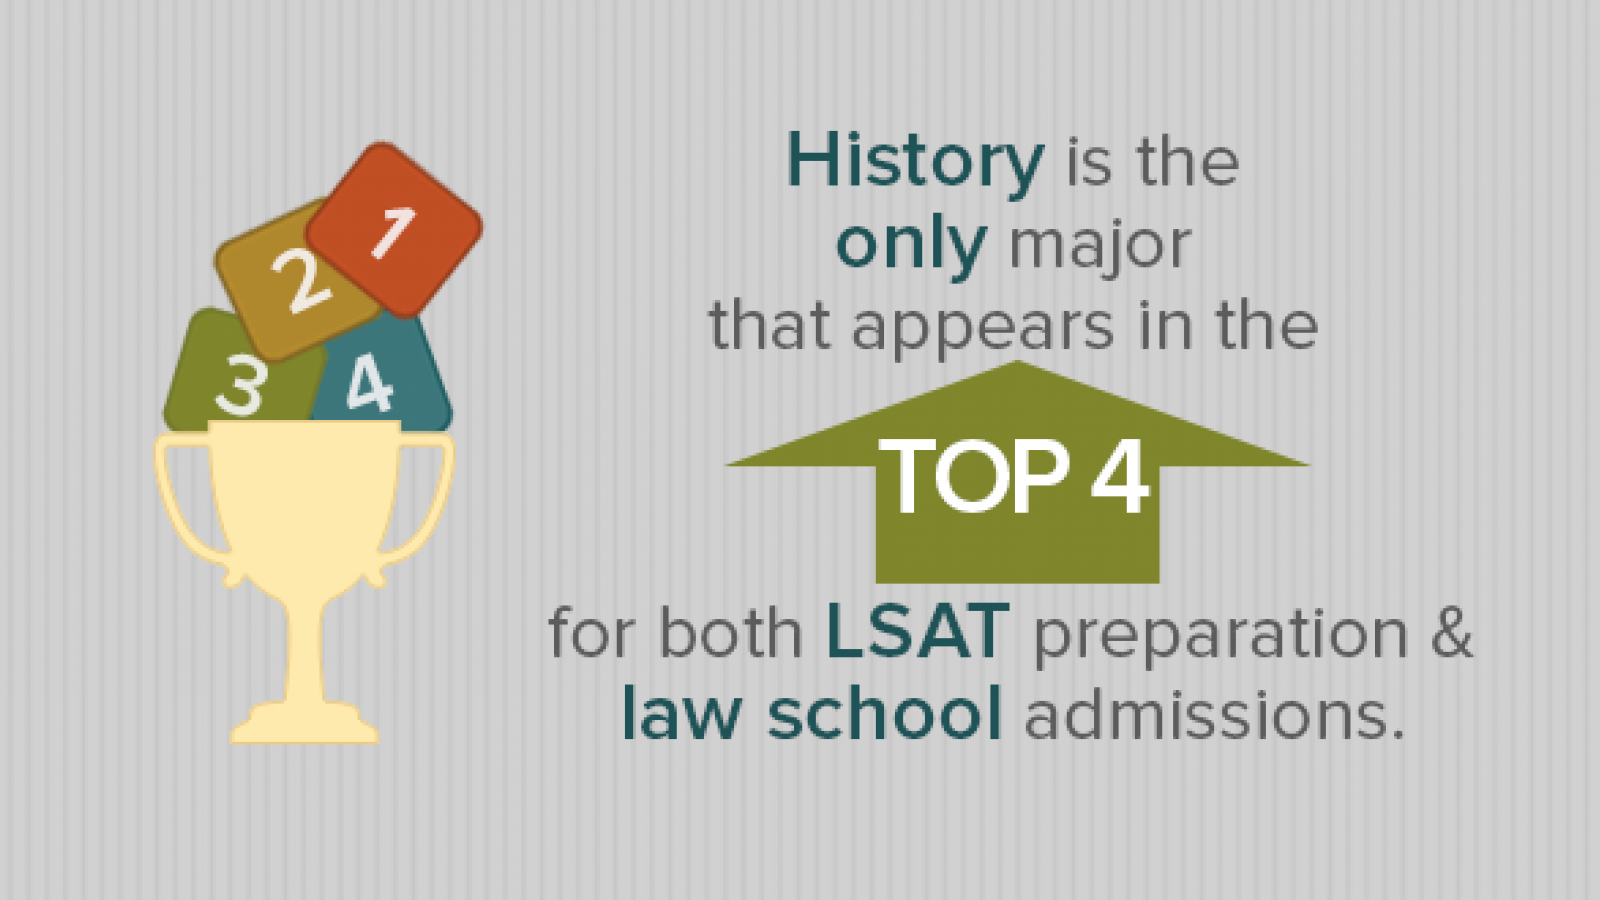 History is the only major that appears in the Top 4 for both LSAT preparation and law school admissions.